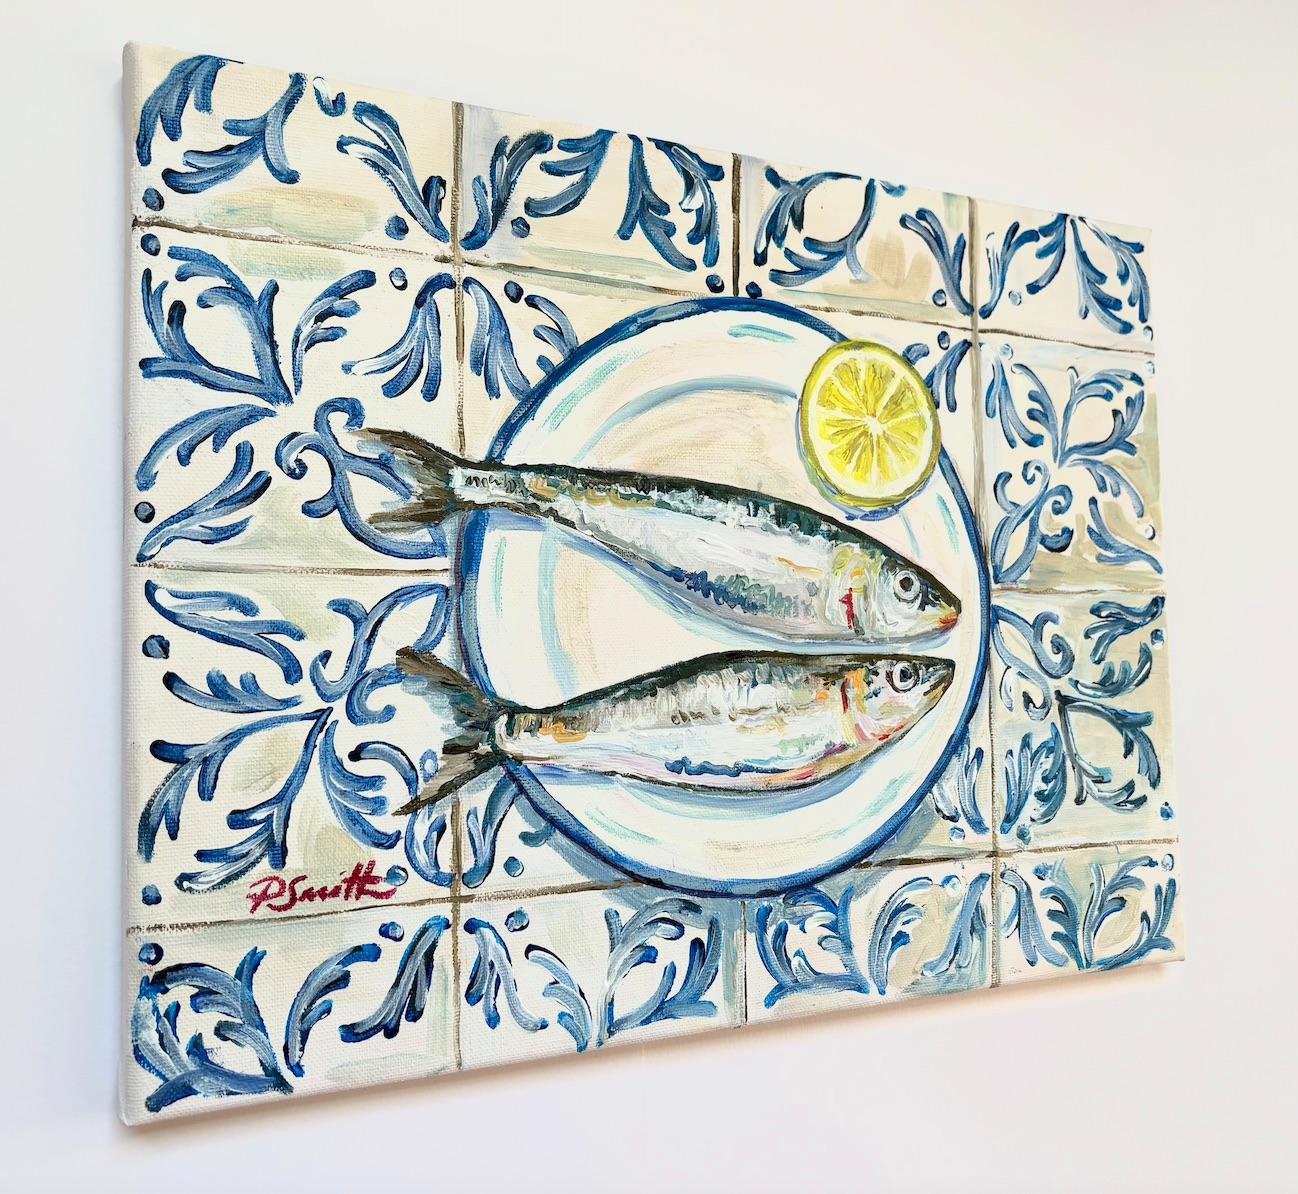 Two Sardines on Spanish Tiles, Original painting, Seafood, Mediterranean art - Contemporary Painting by Pippa Smith